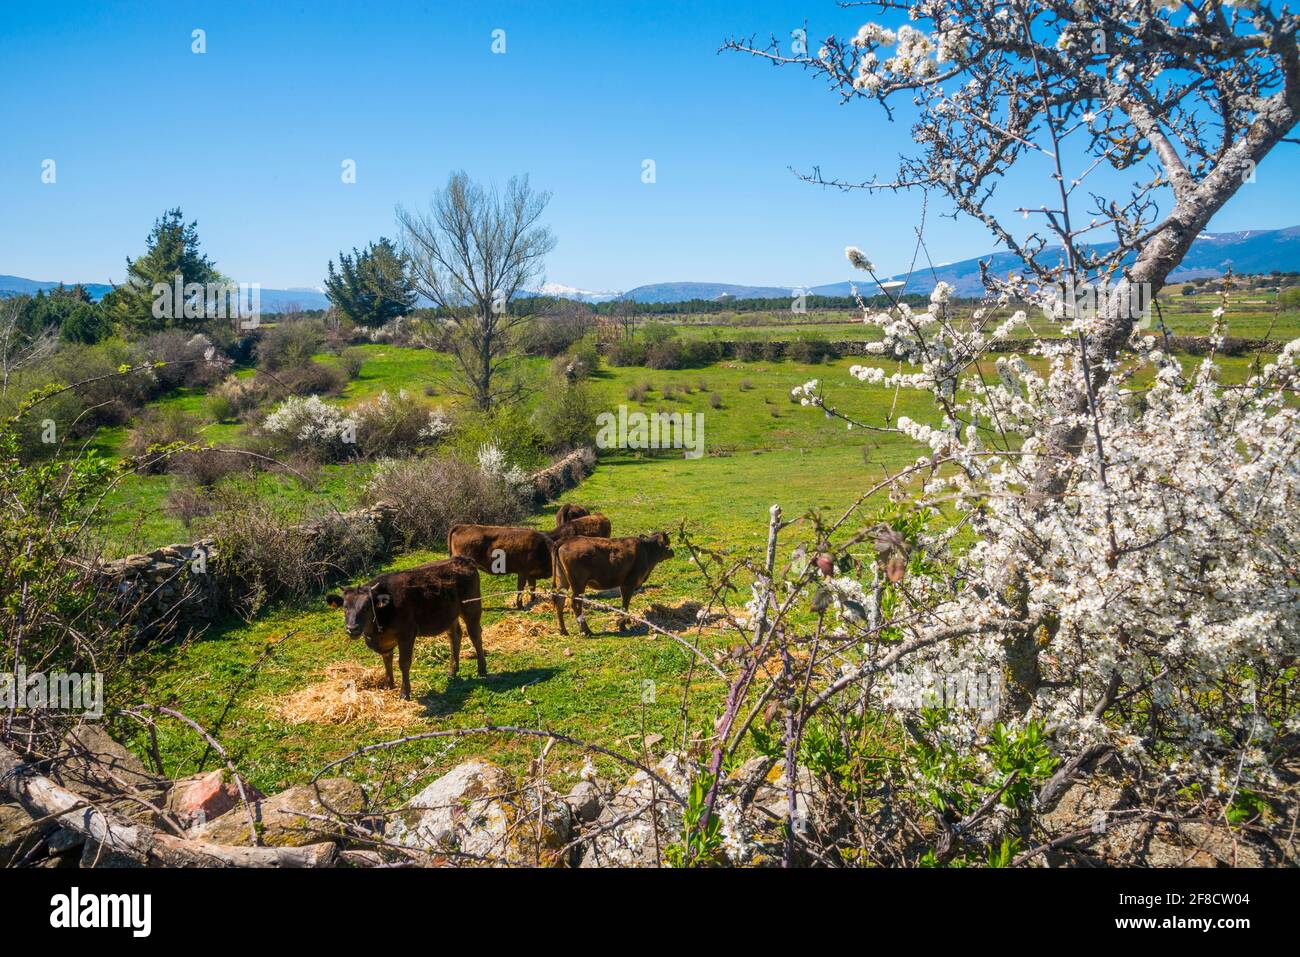 Group of calves in a meadow. Gandullas, Madrid province, Spain. Stock Photo